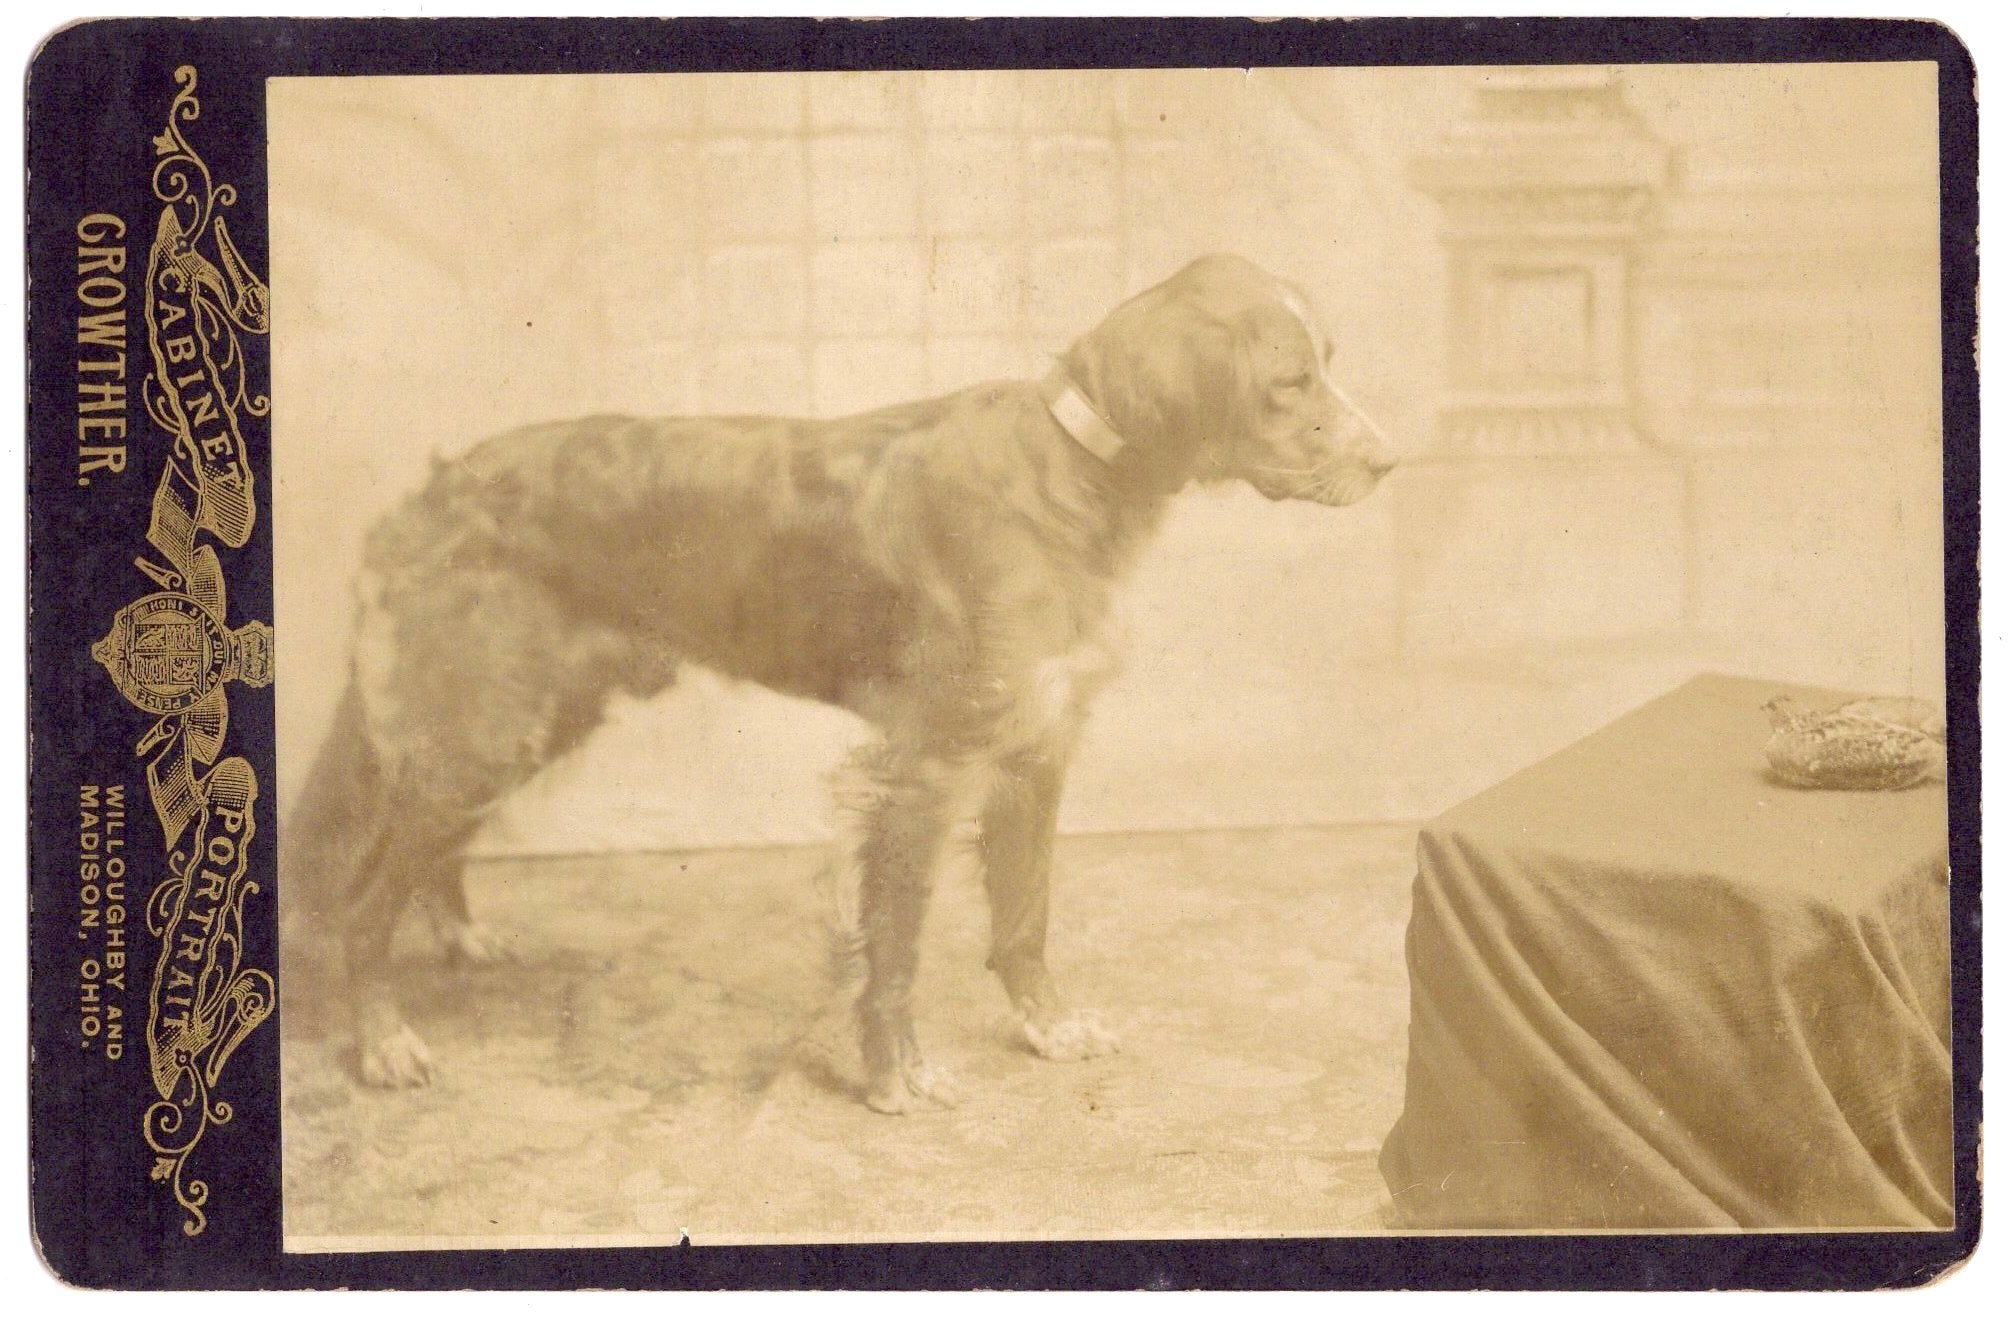 Photograph of a dog staring at a pigeon (occupational dog portrait, cabinet card photograph)